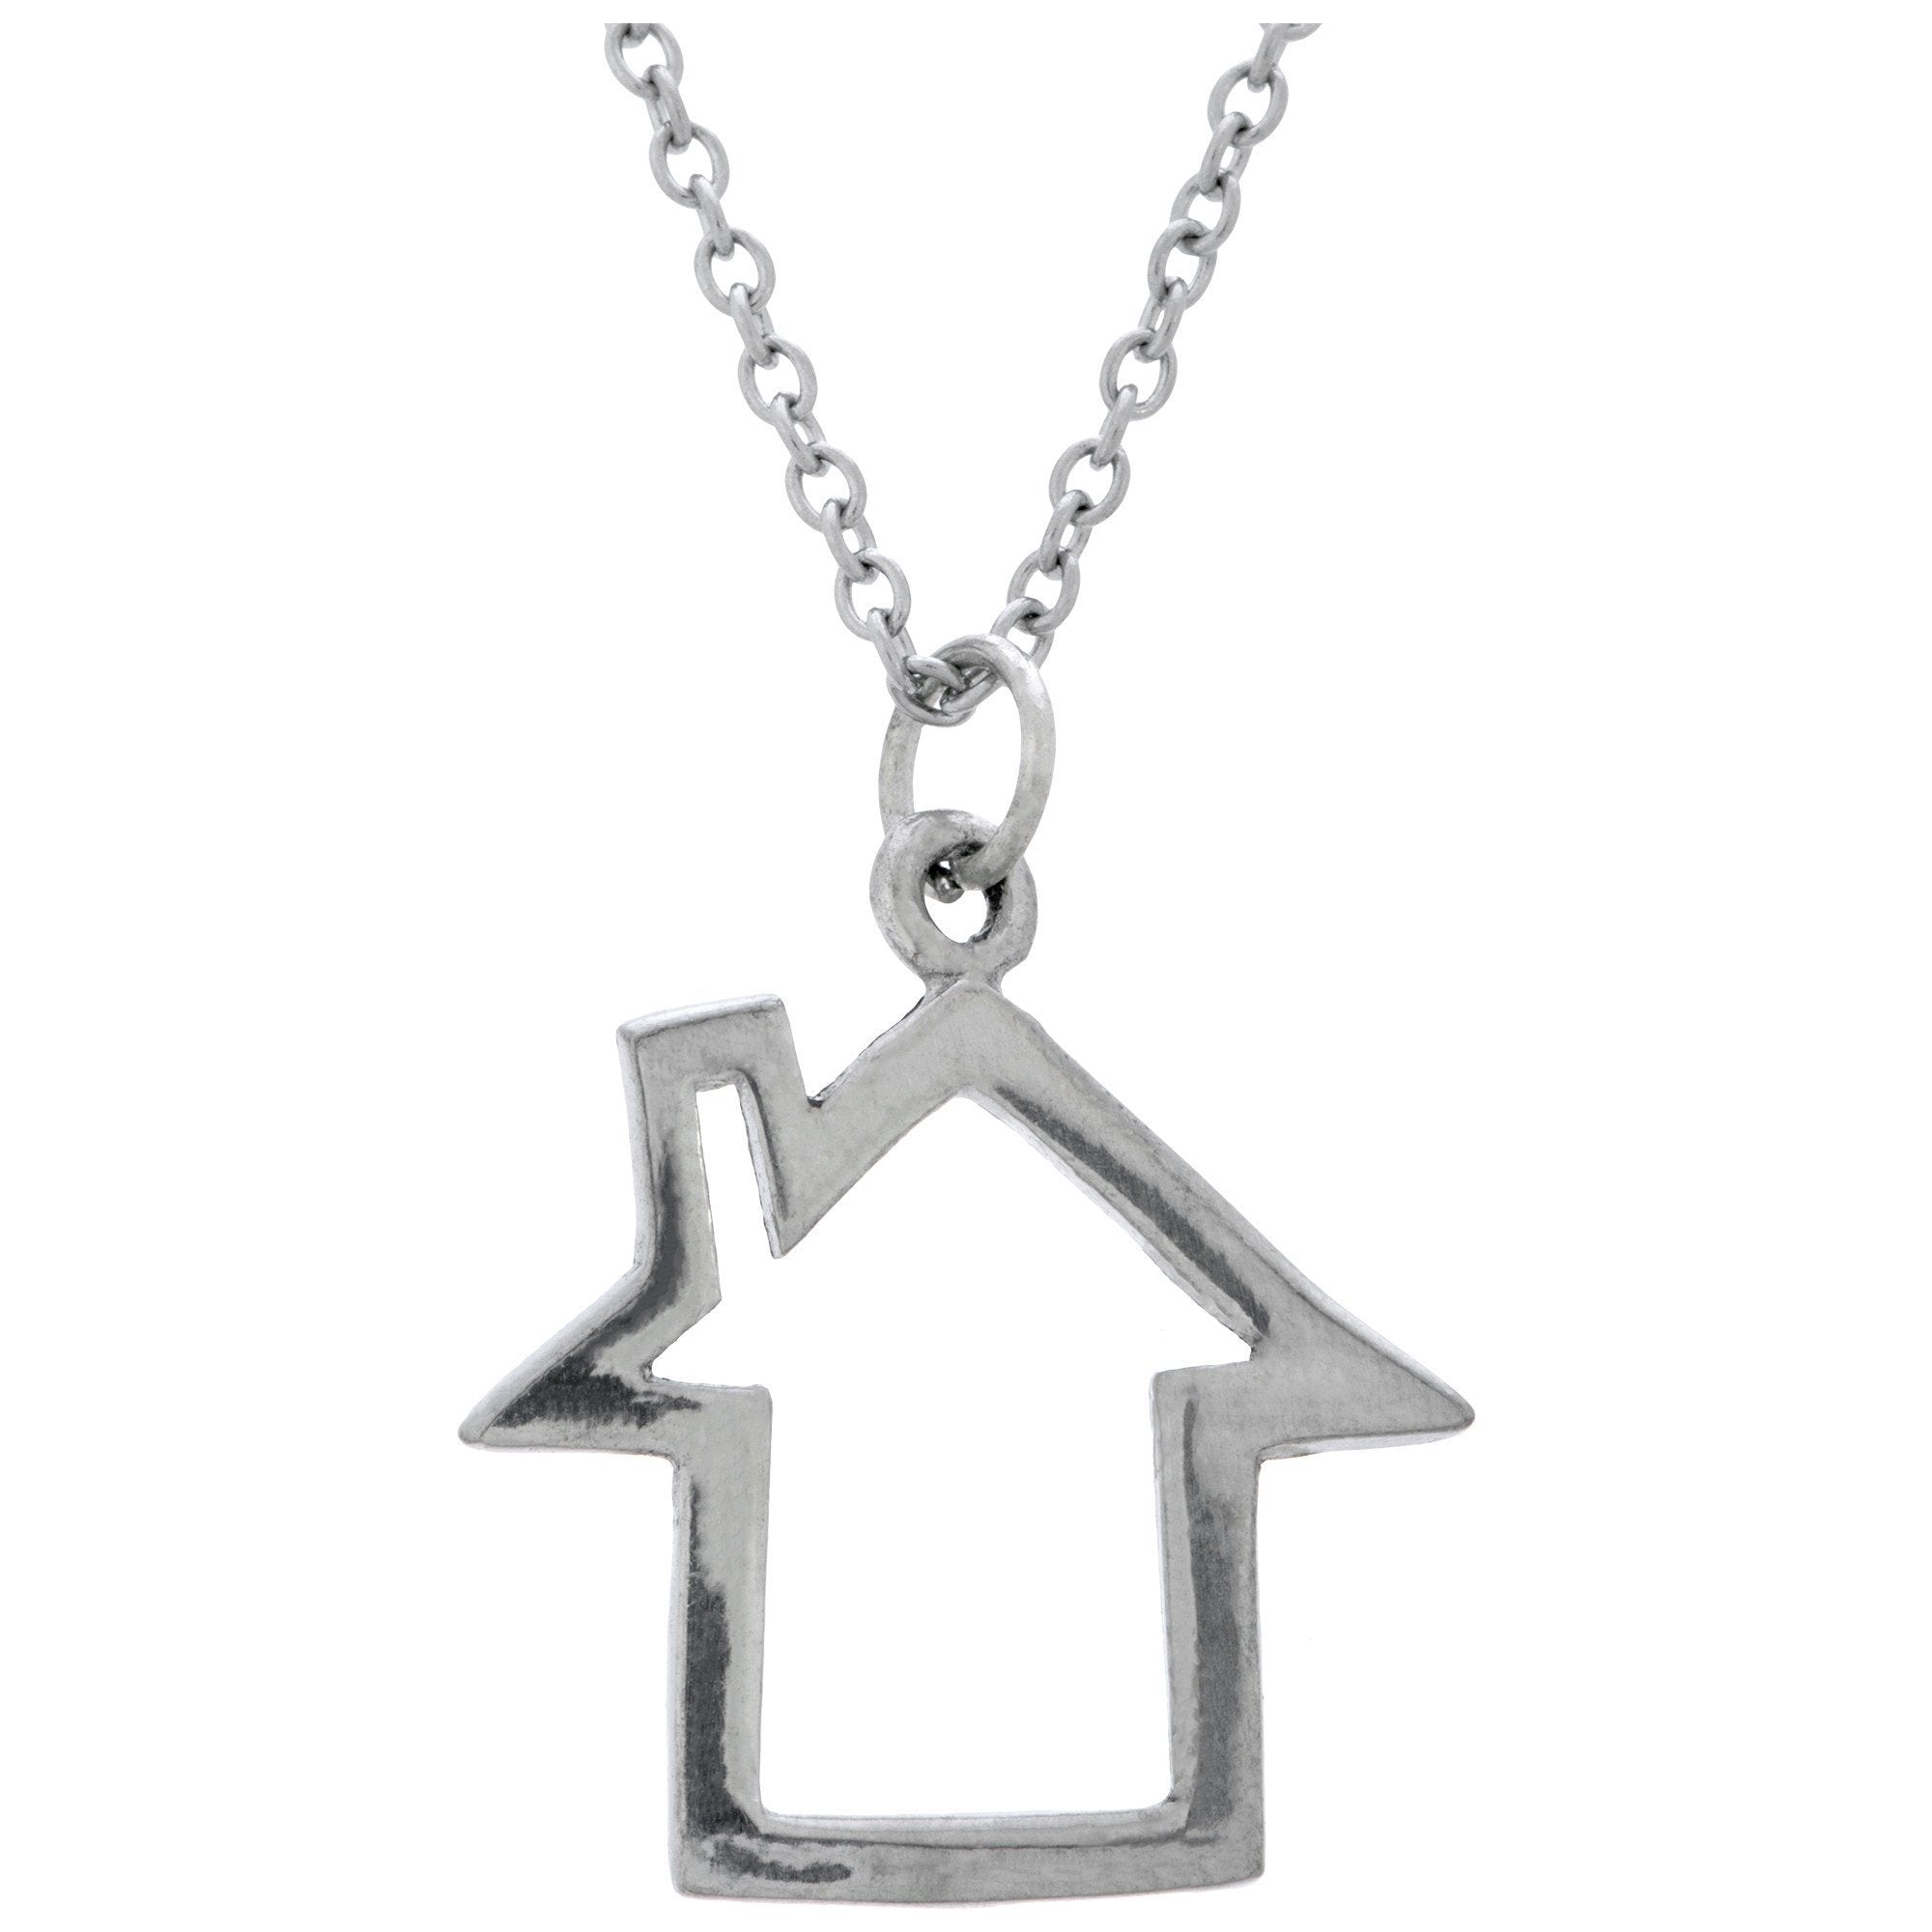 Home Full Of Love Necklace - Home Outline